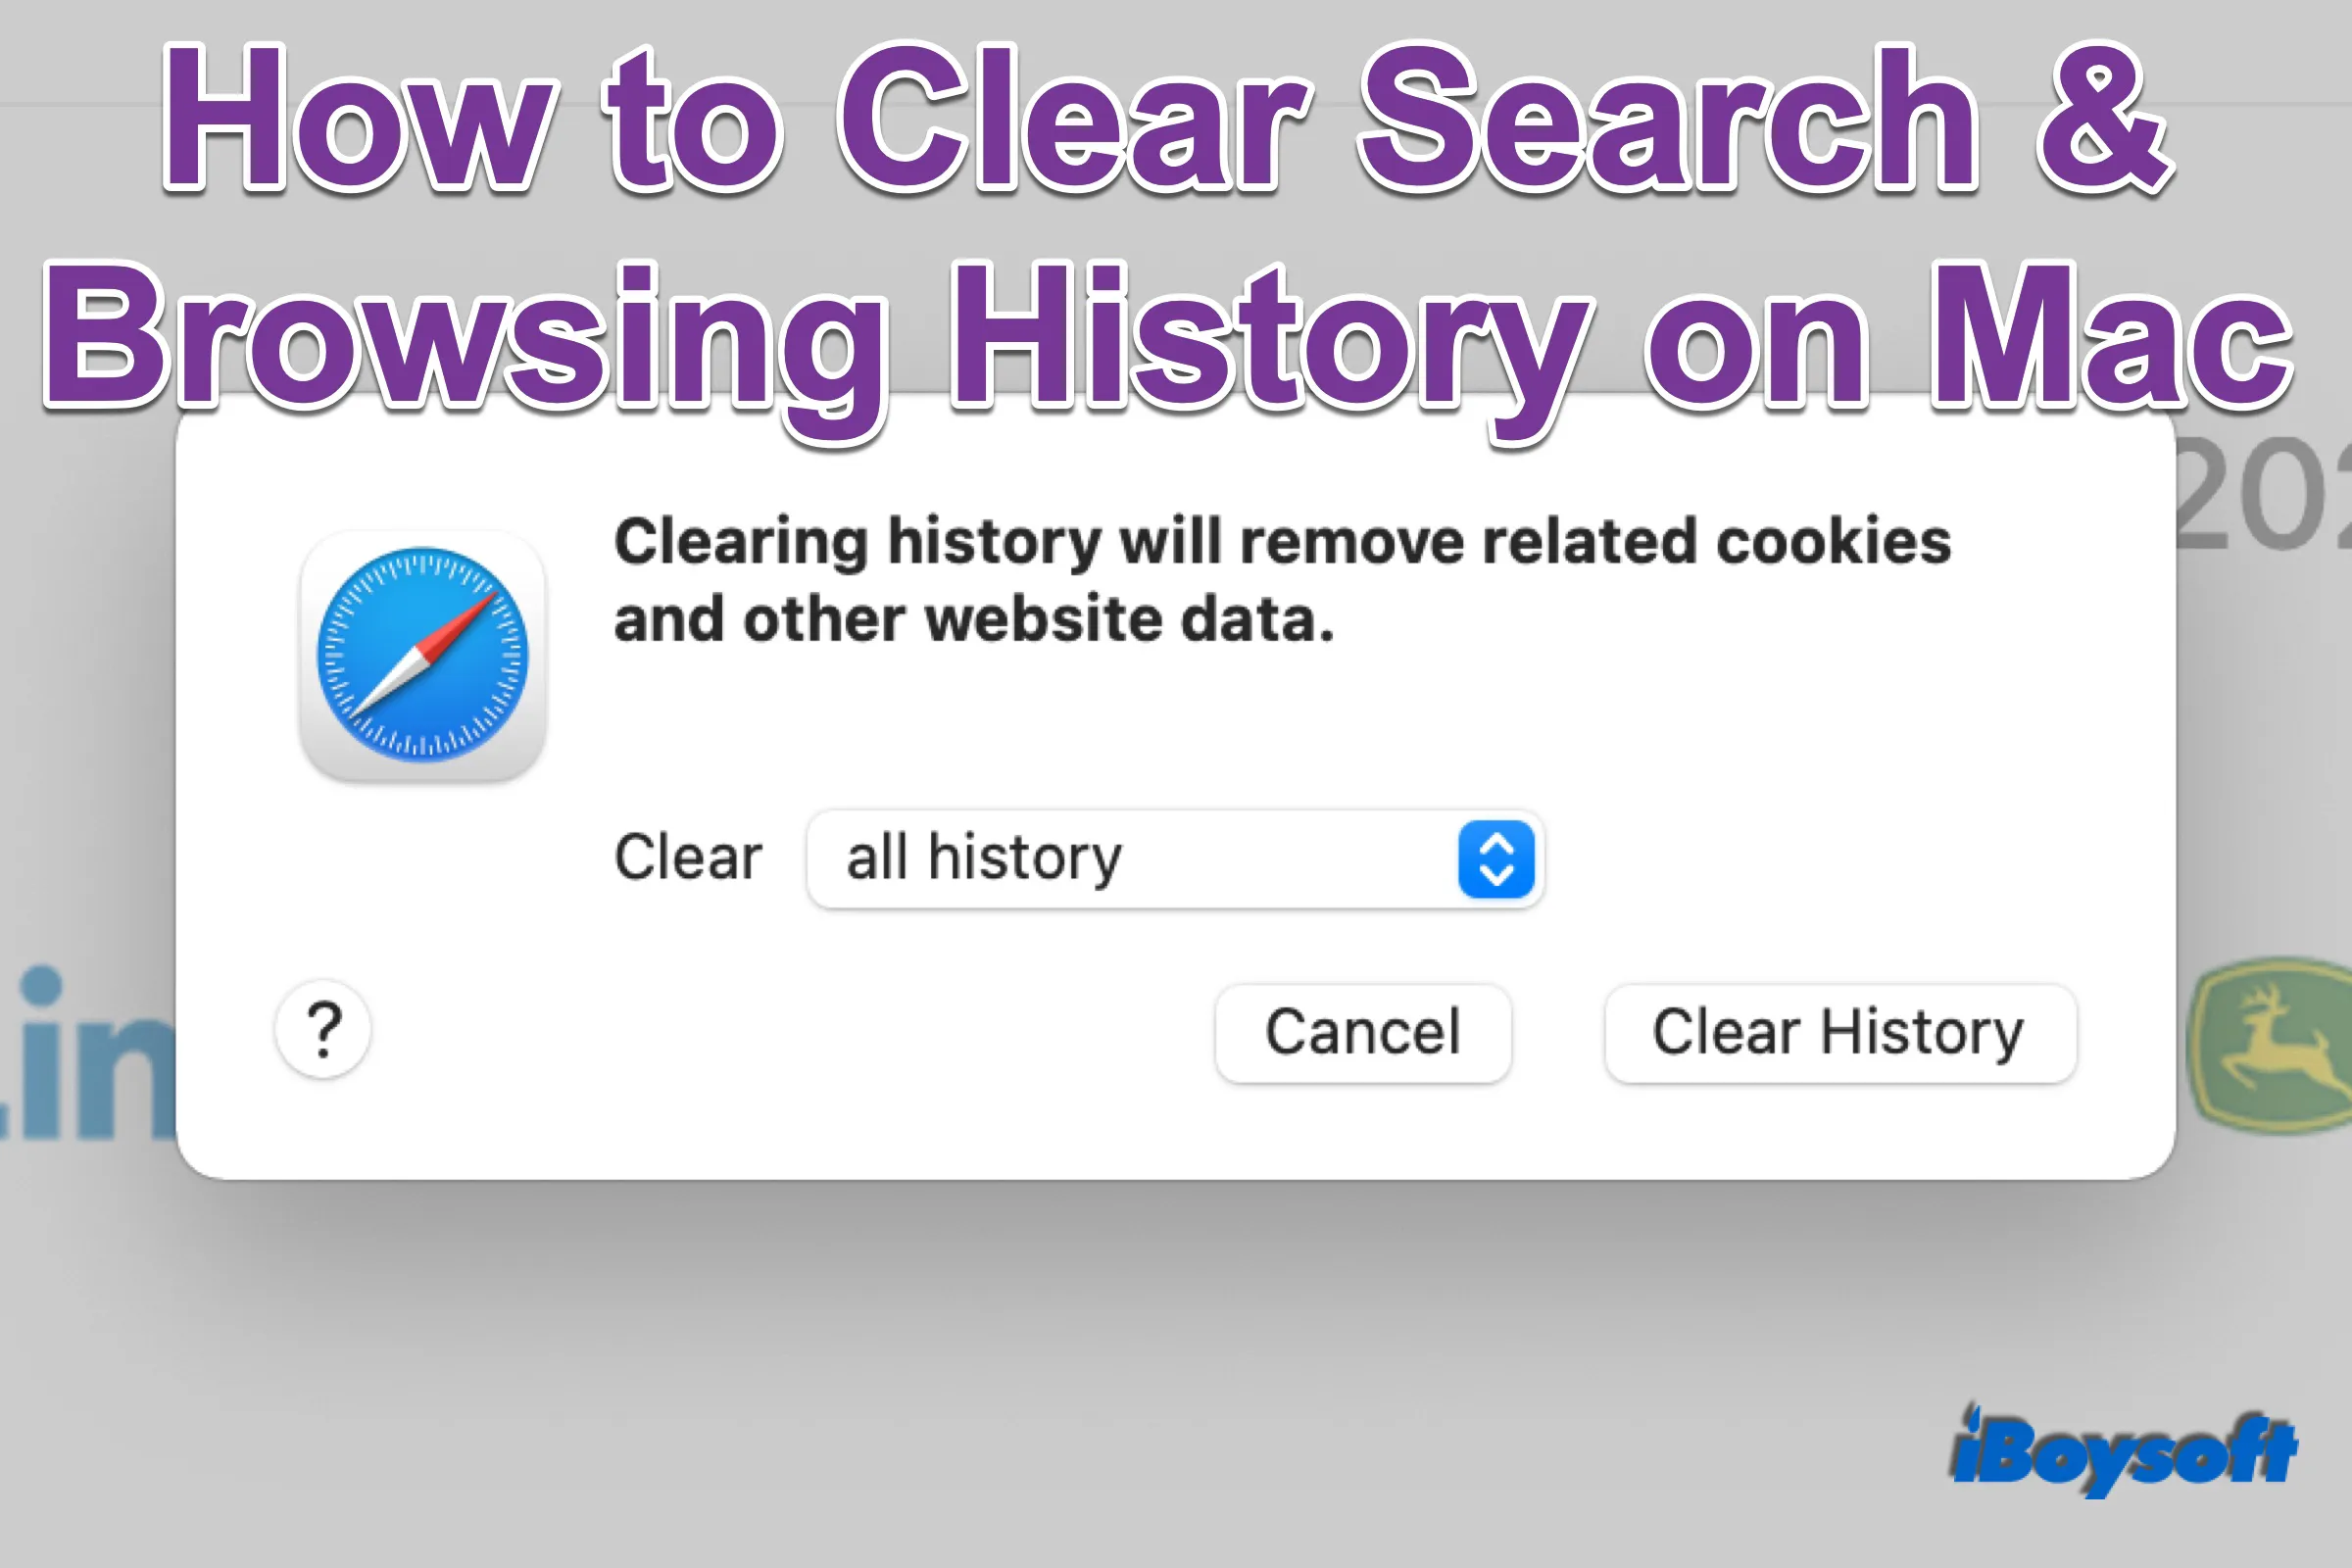 clear search/browsing history on Mac